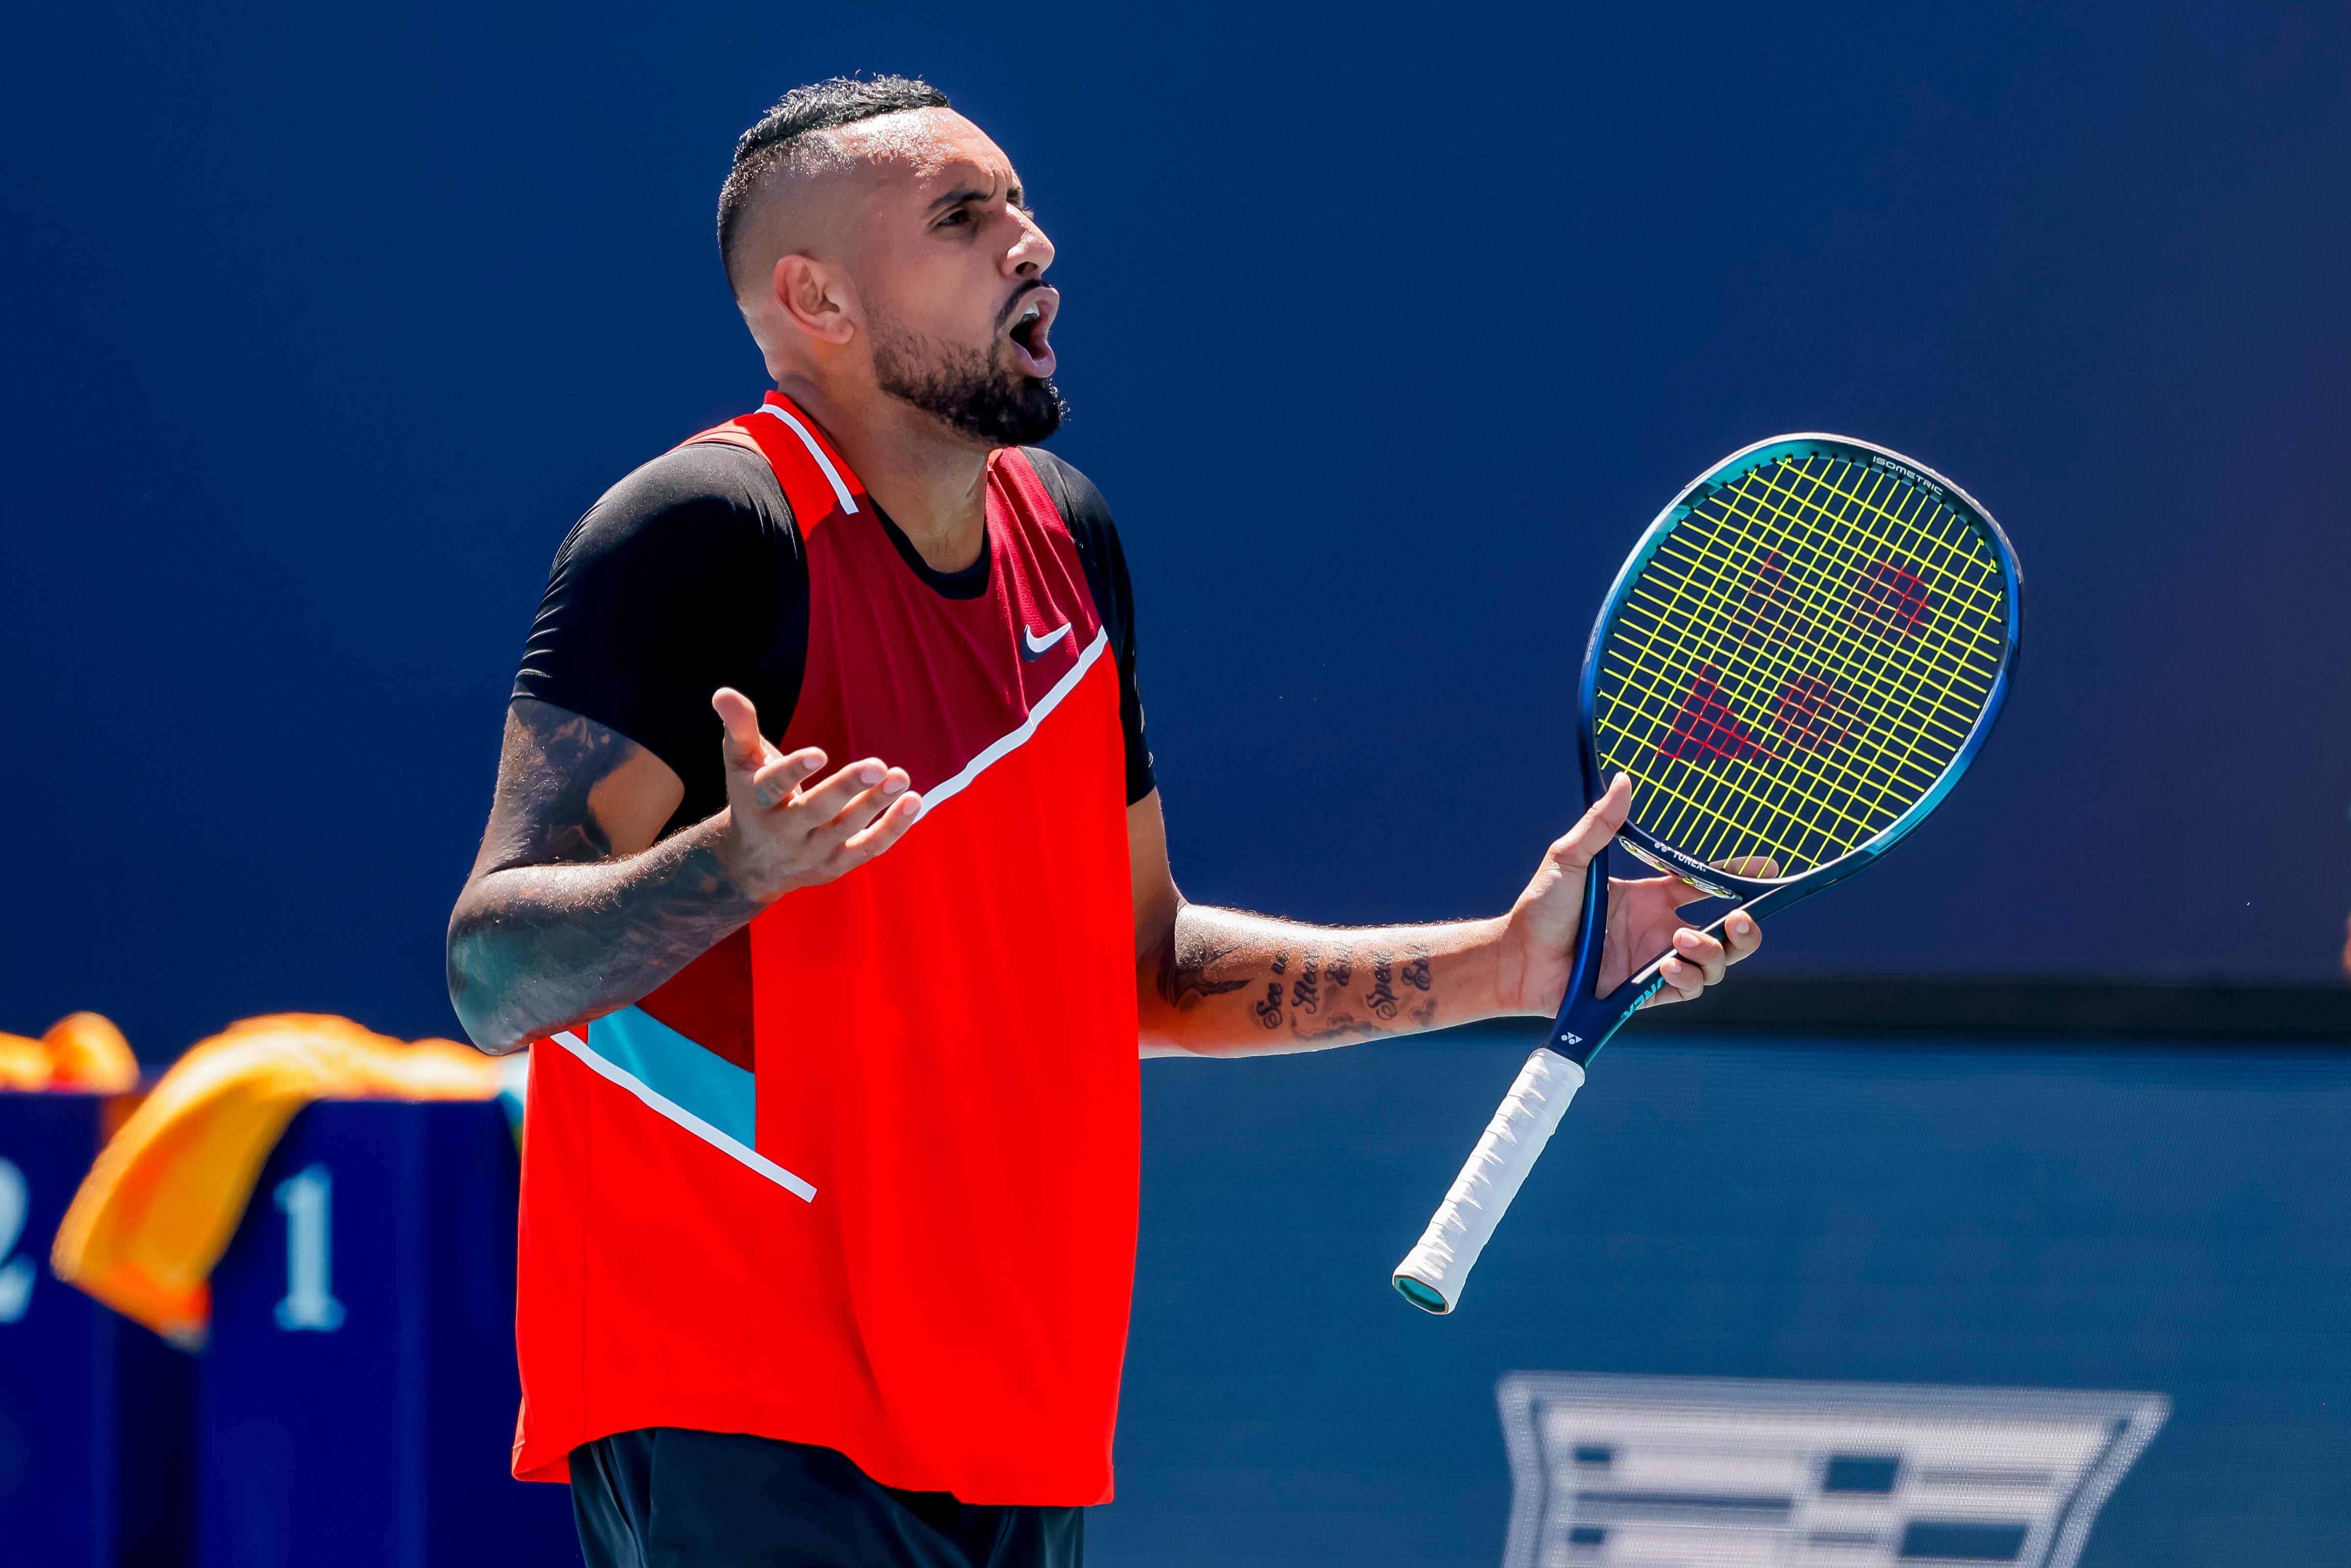 Nick Kyrgios docked a game during chaotic defeat to Jannik Sinner at Miami Open The Independent